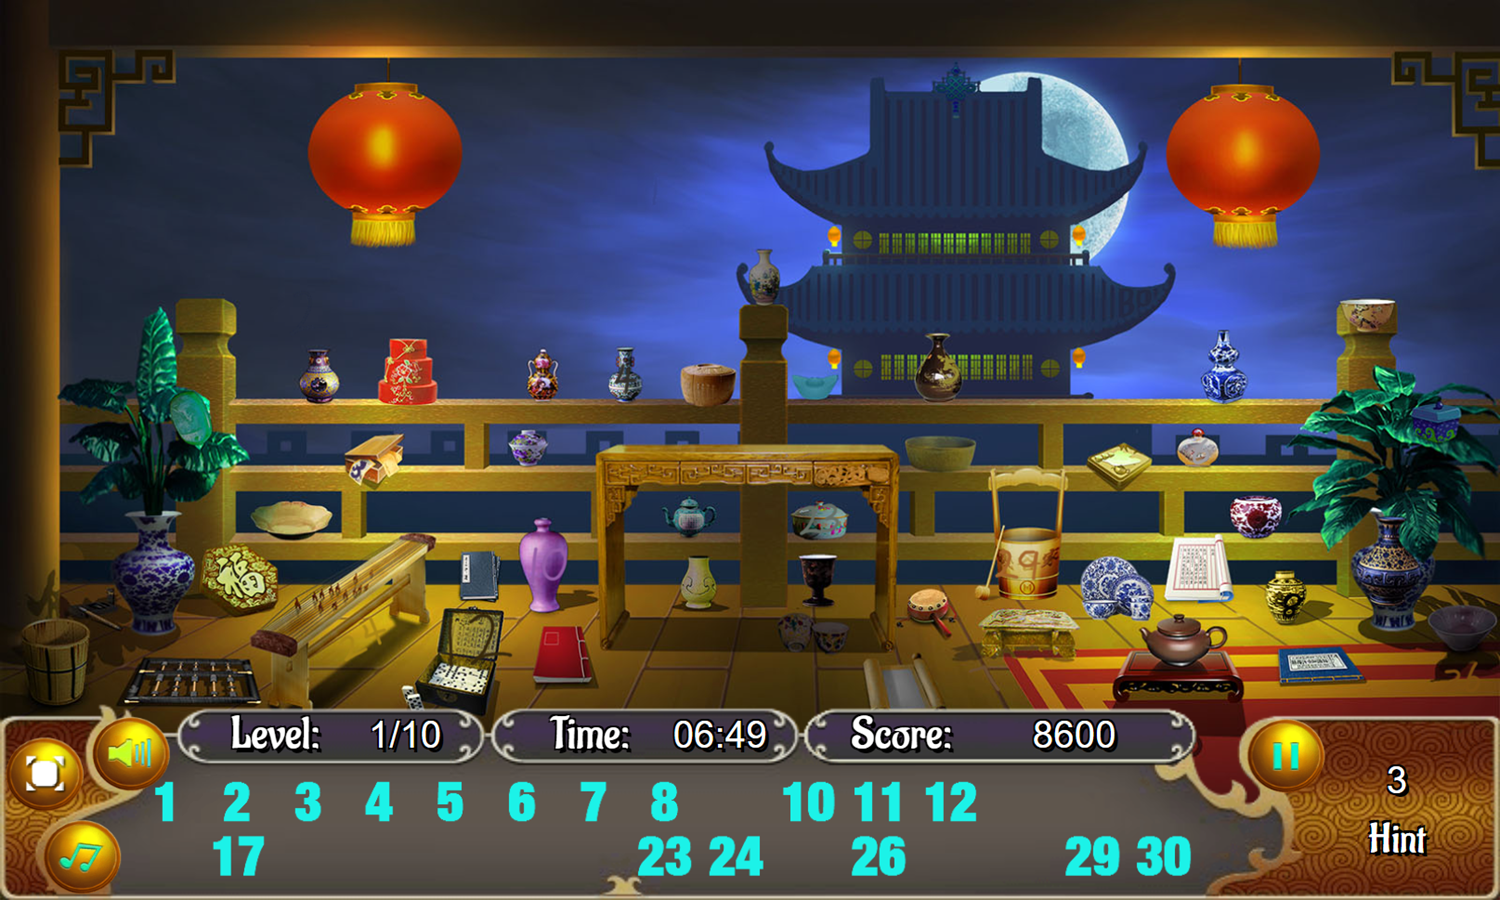 China Temple Game Stage 2 Play Screenshot.